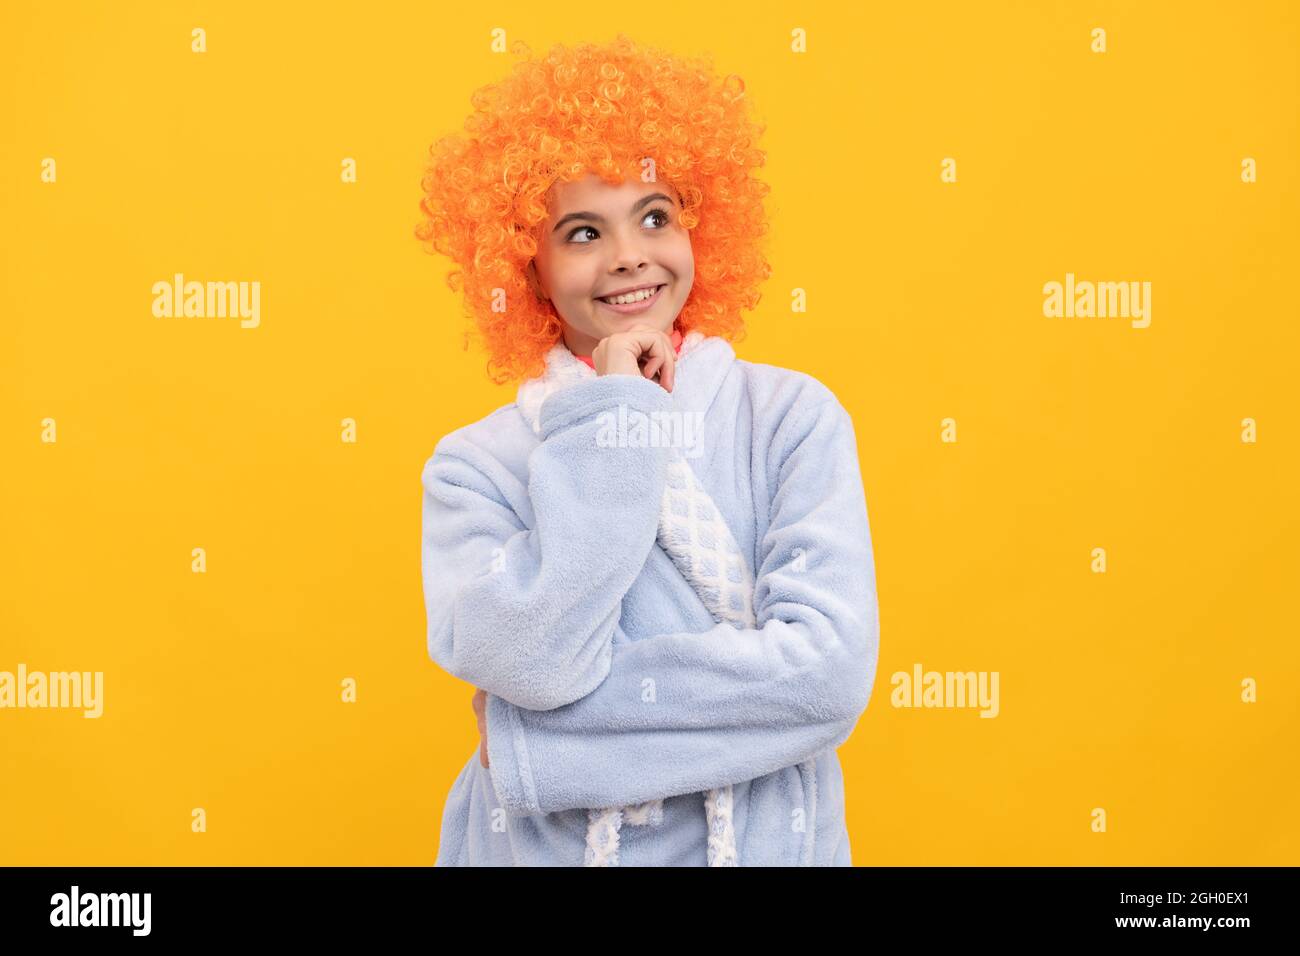 good morning. childhood happiness. birthday or pajama party. funny kid in curly clown wig. Stock Photo